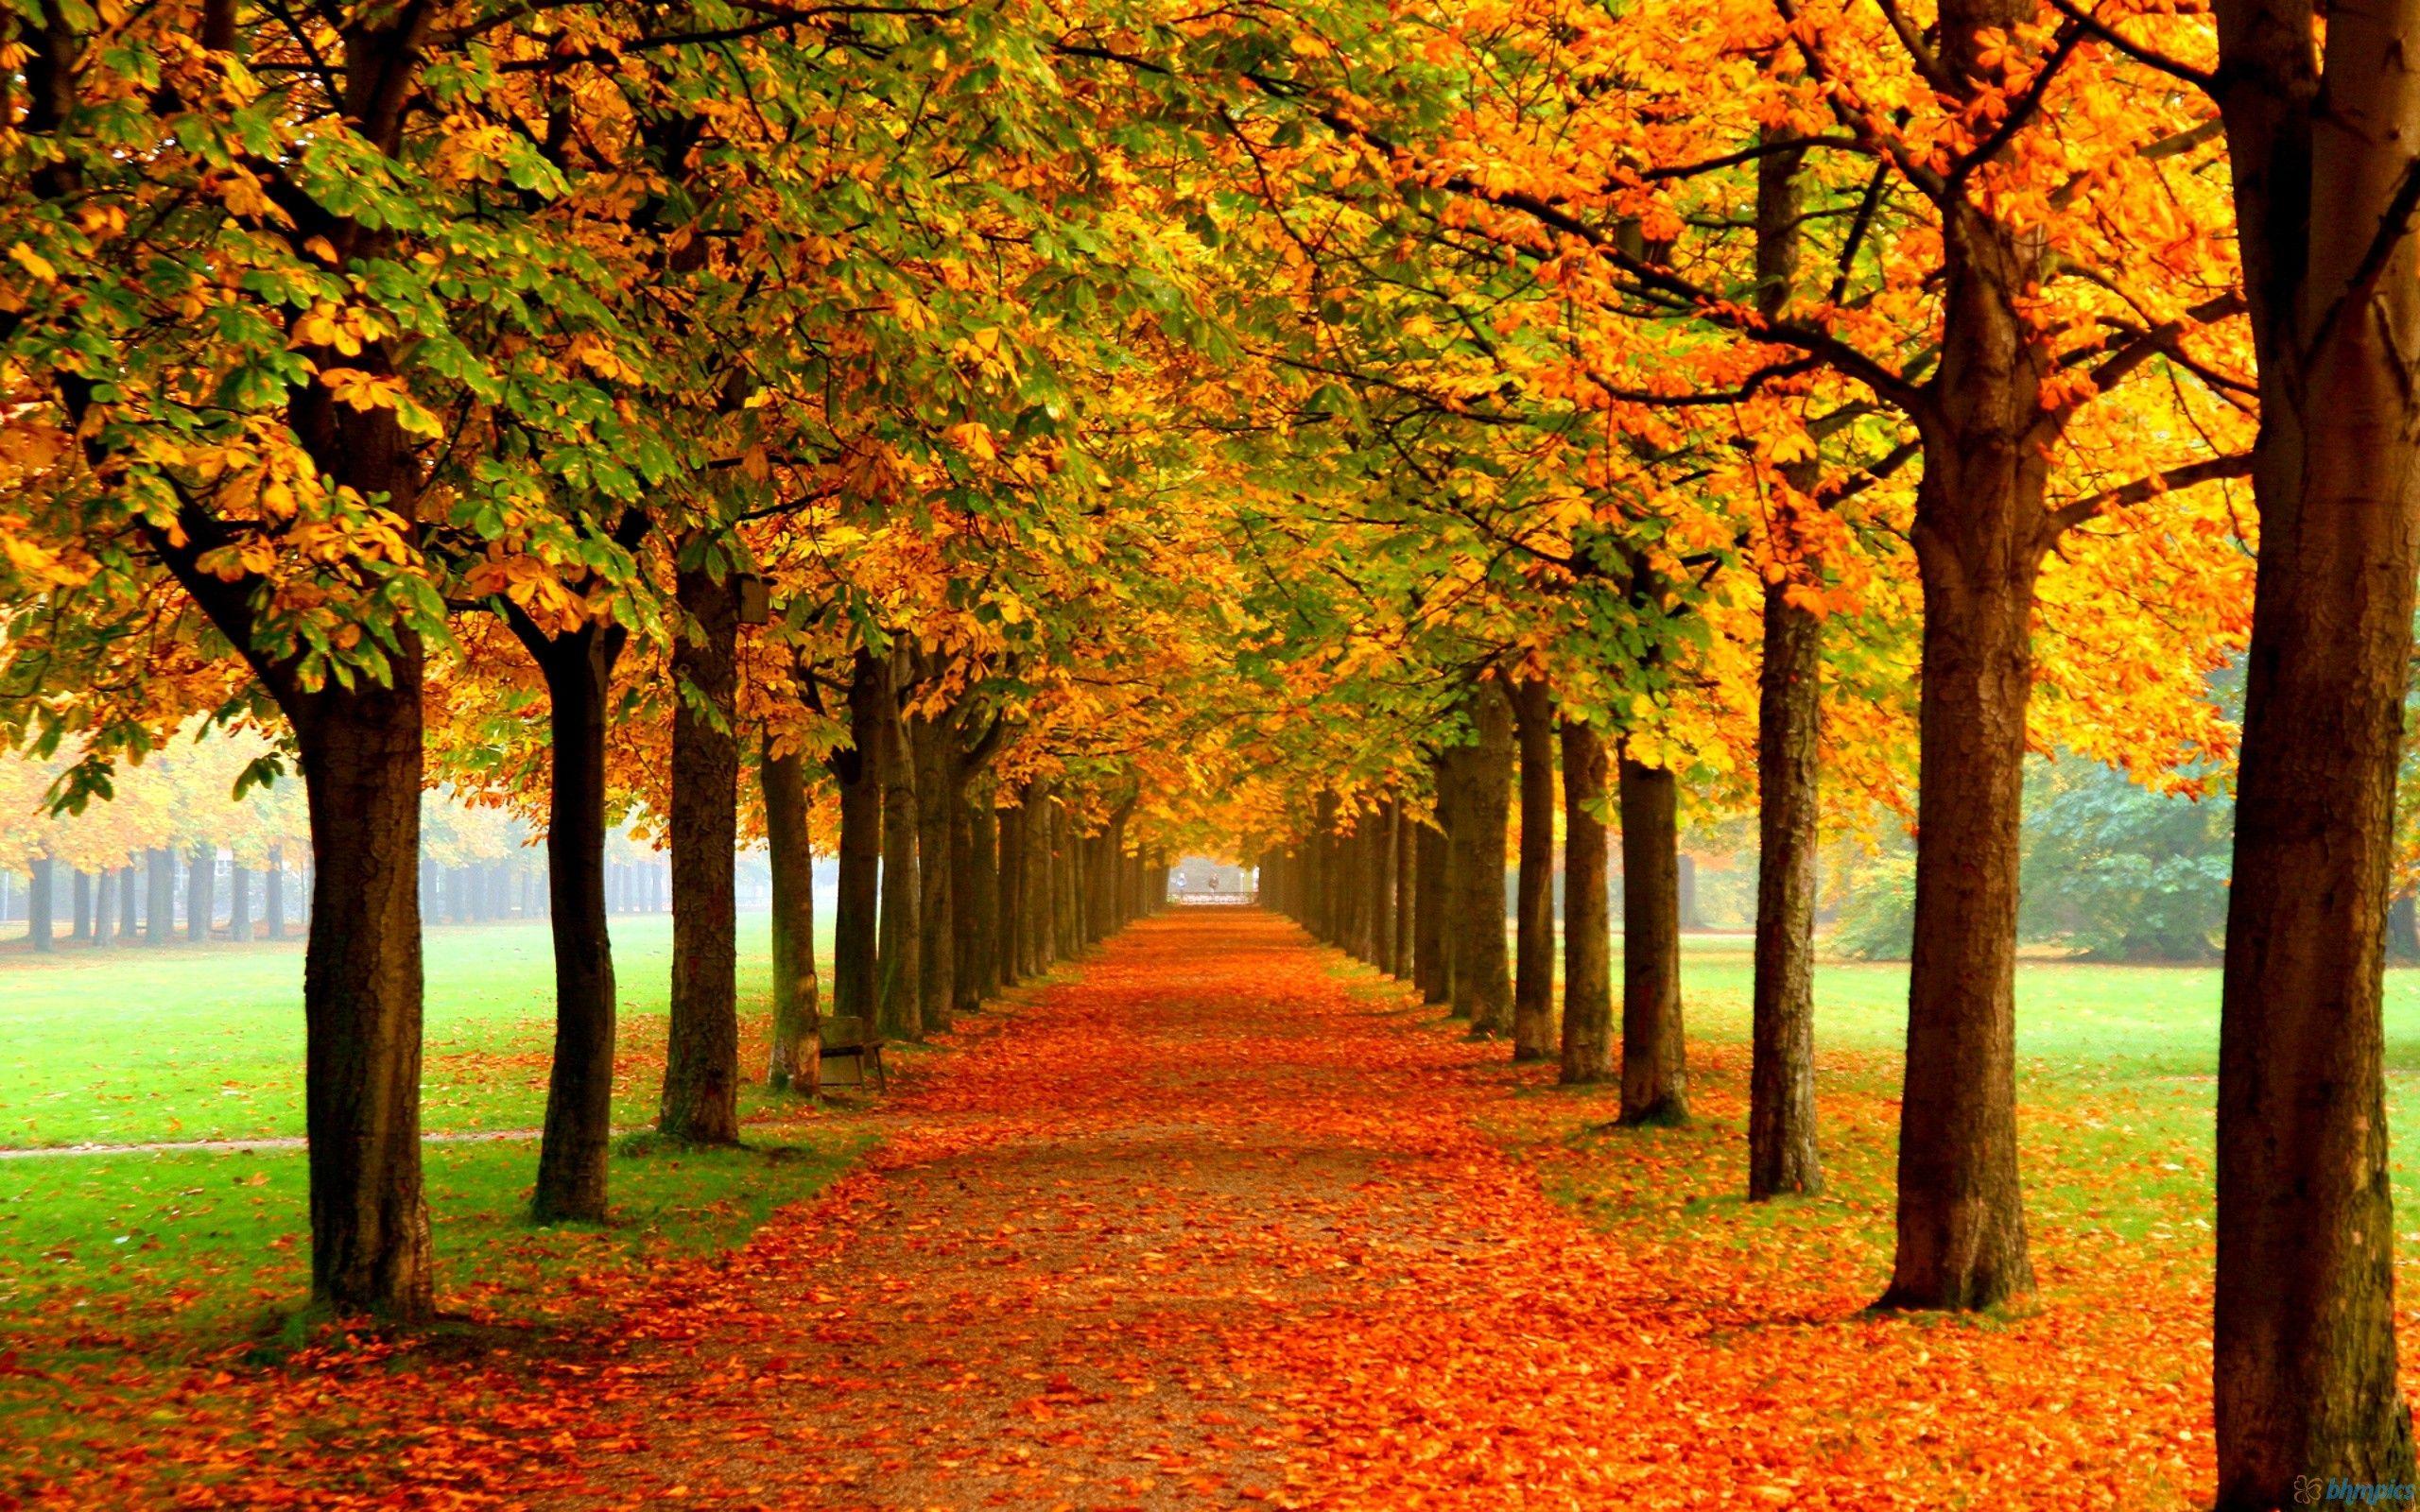 Forests: Park Autumn Leaves Static Red Orange Road Trees Fall Nature